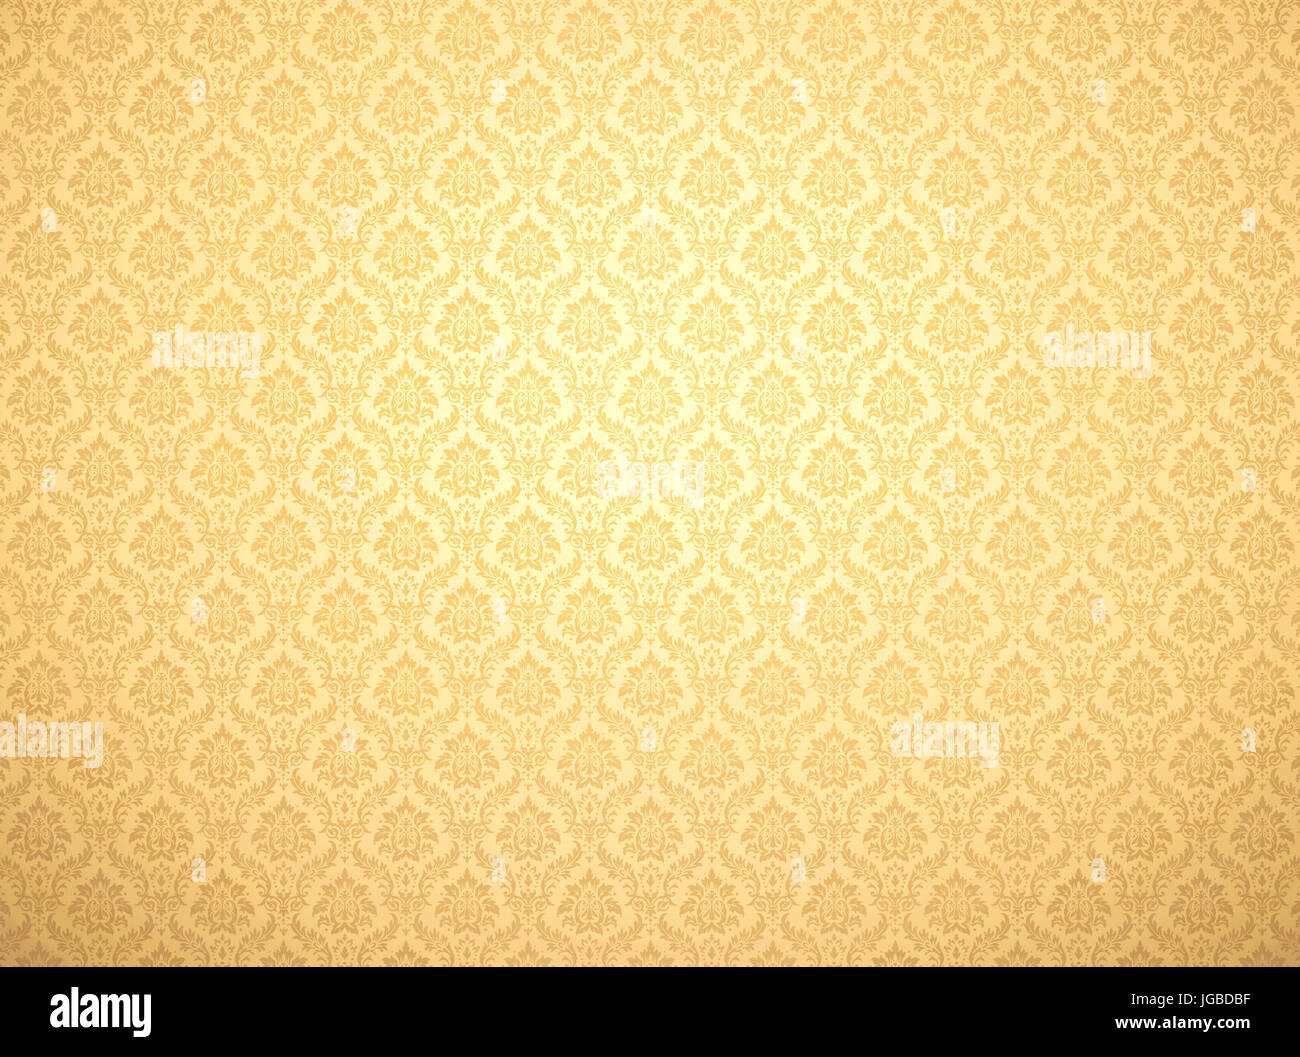 Golden damask wallpaper with floral patterns Stock Photo